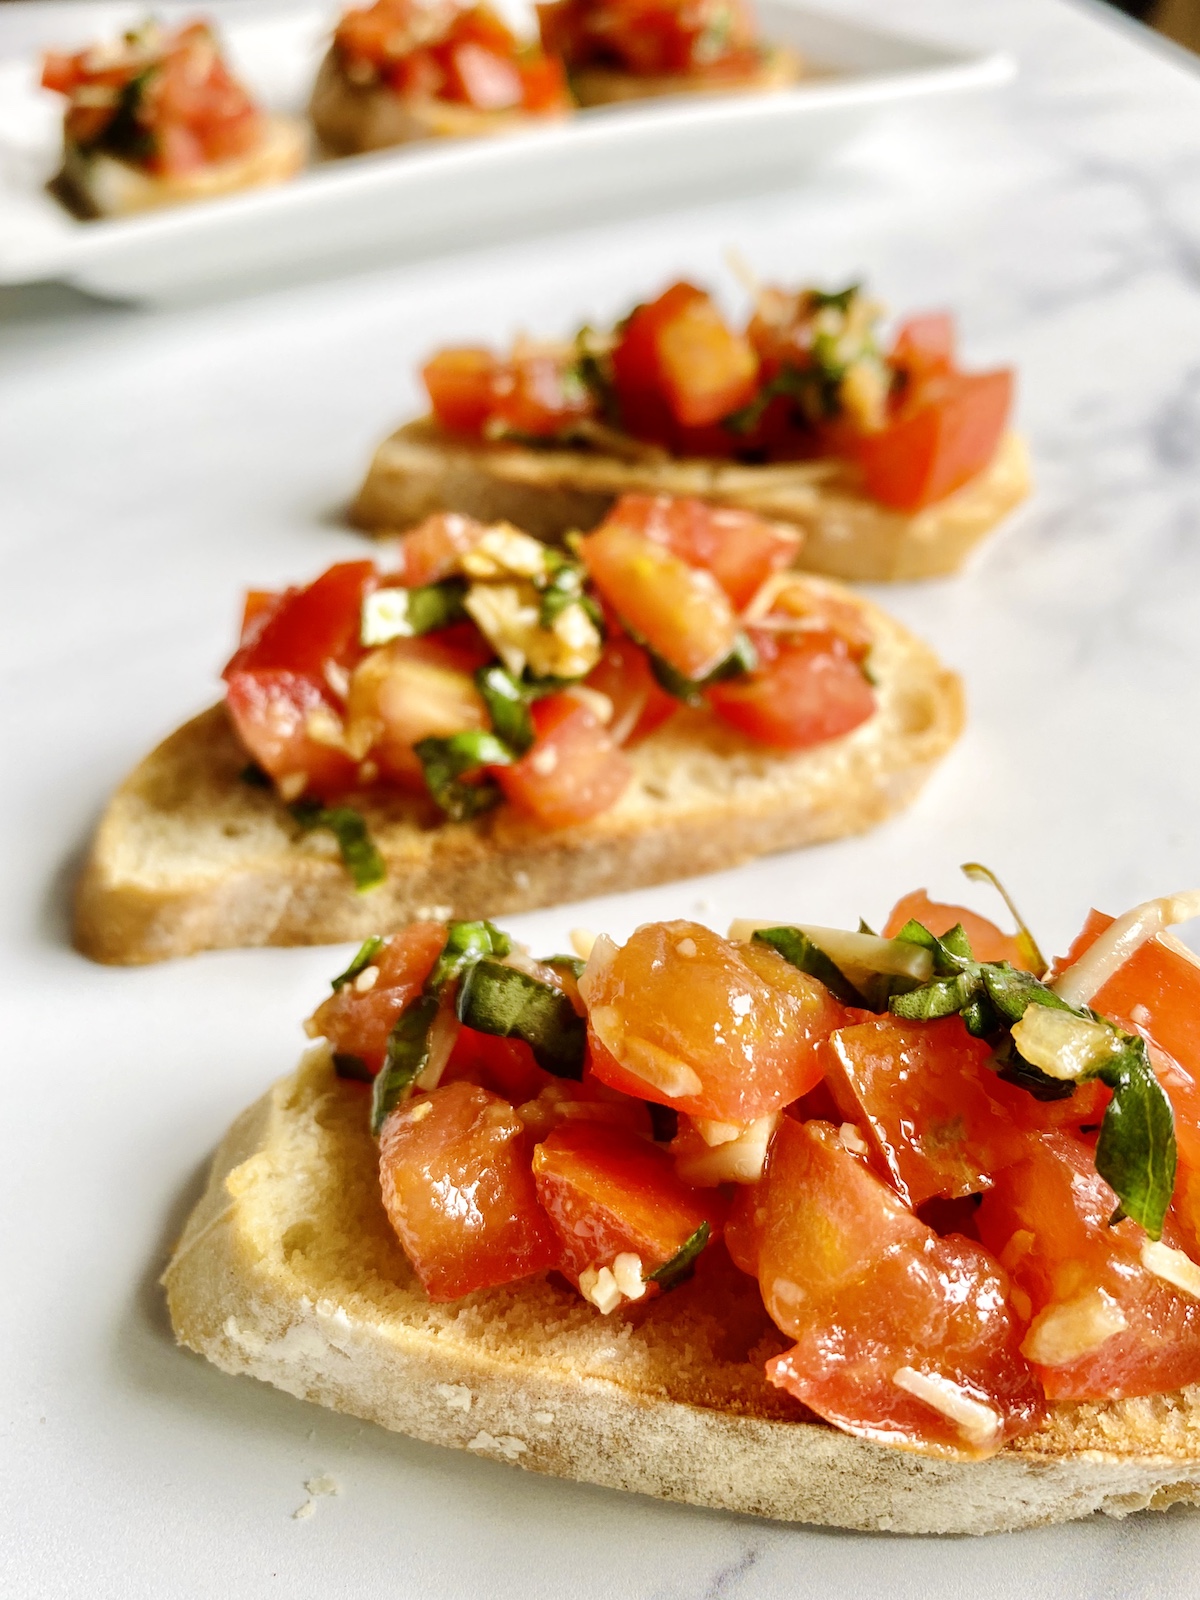 Homemade Bruschetta with Parmesan - Globally Flavored